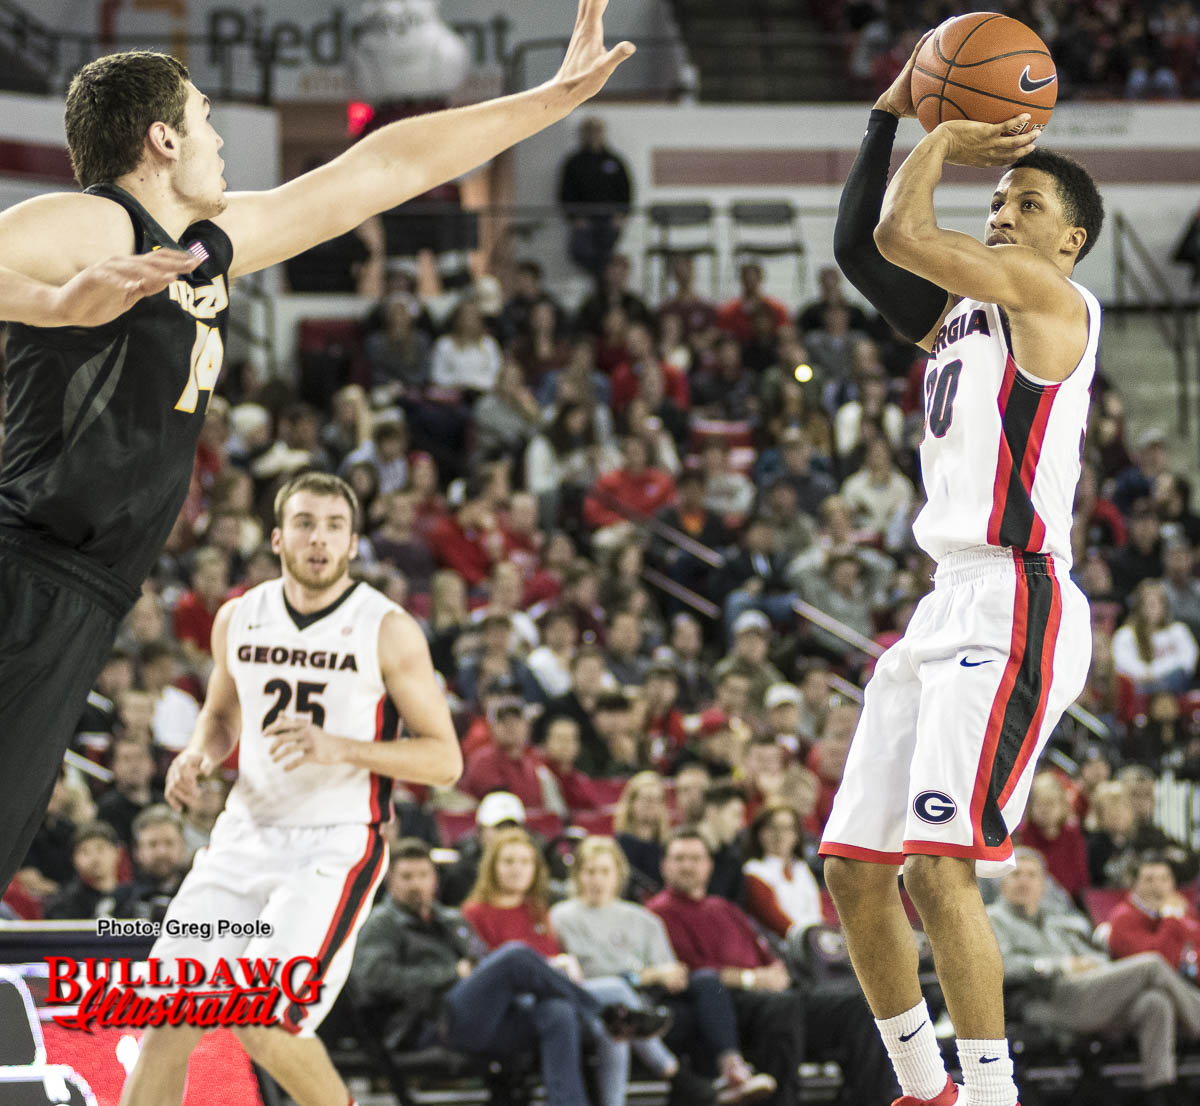 J.J. Frazier takes a jump shot during the Bulldog's basketball game versus Missouri on Saturday afternoon.